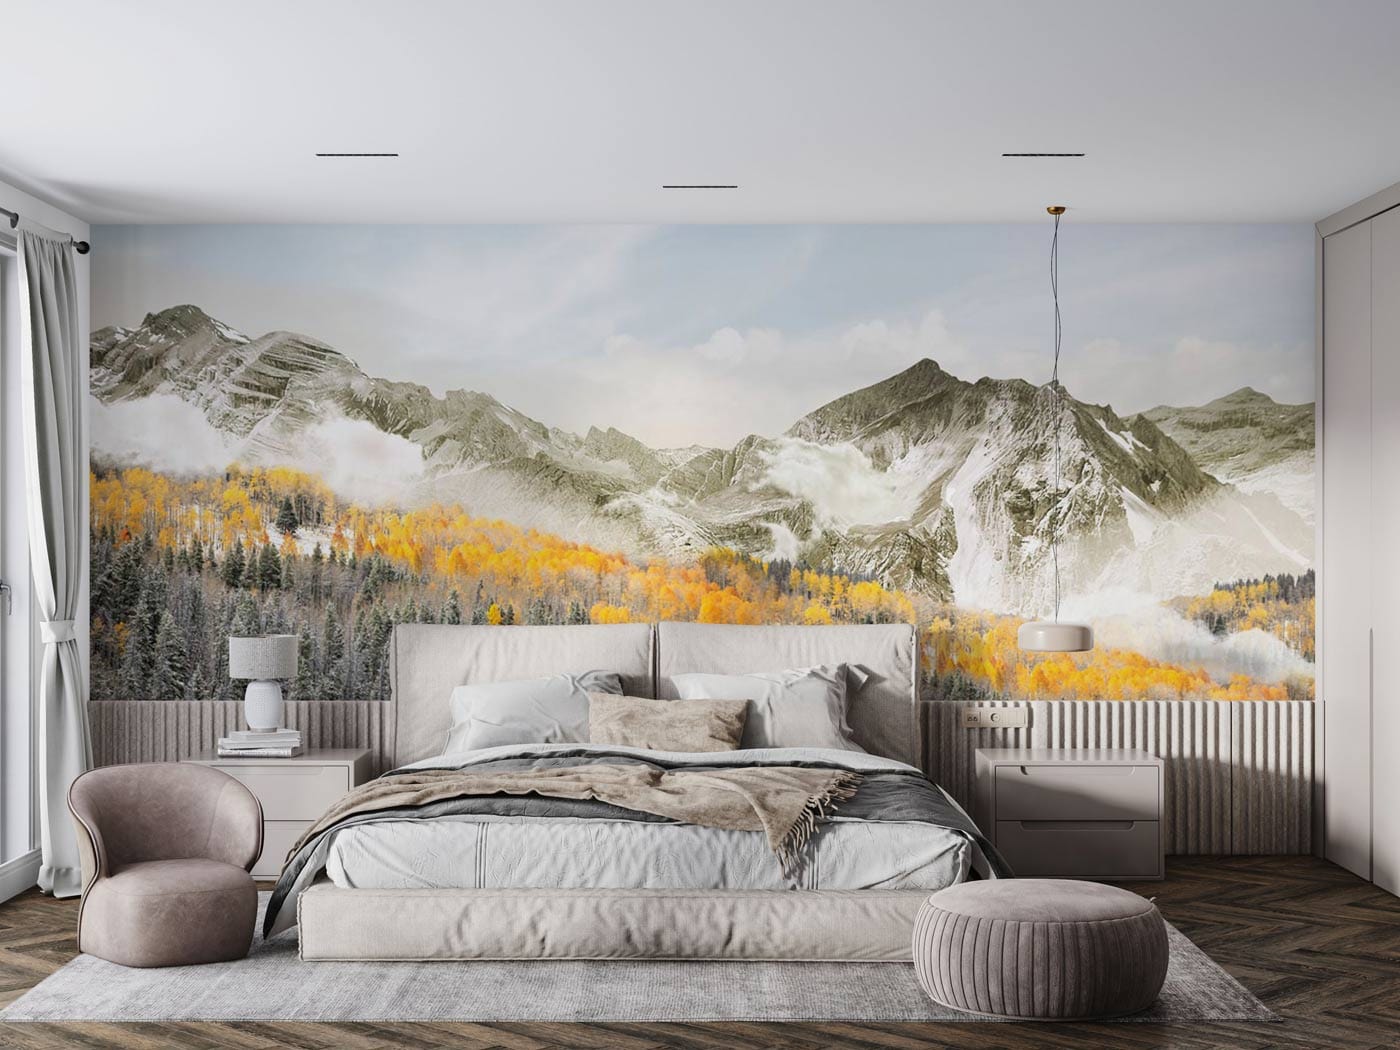 Wallpaper mural featuring an Autumn forest and mountain scene for use in decorating bedrooms